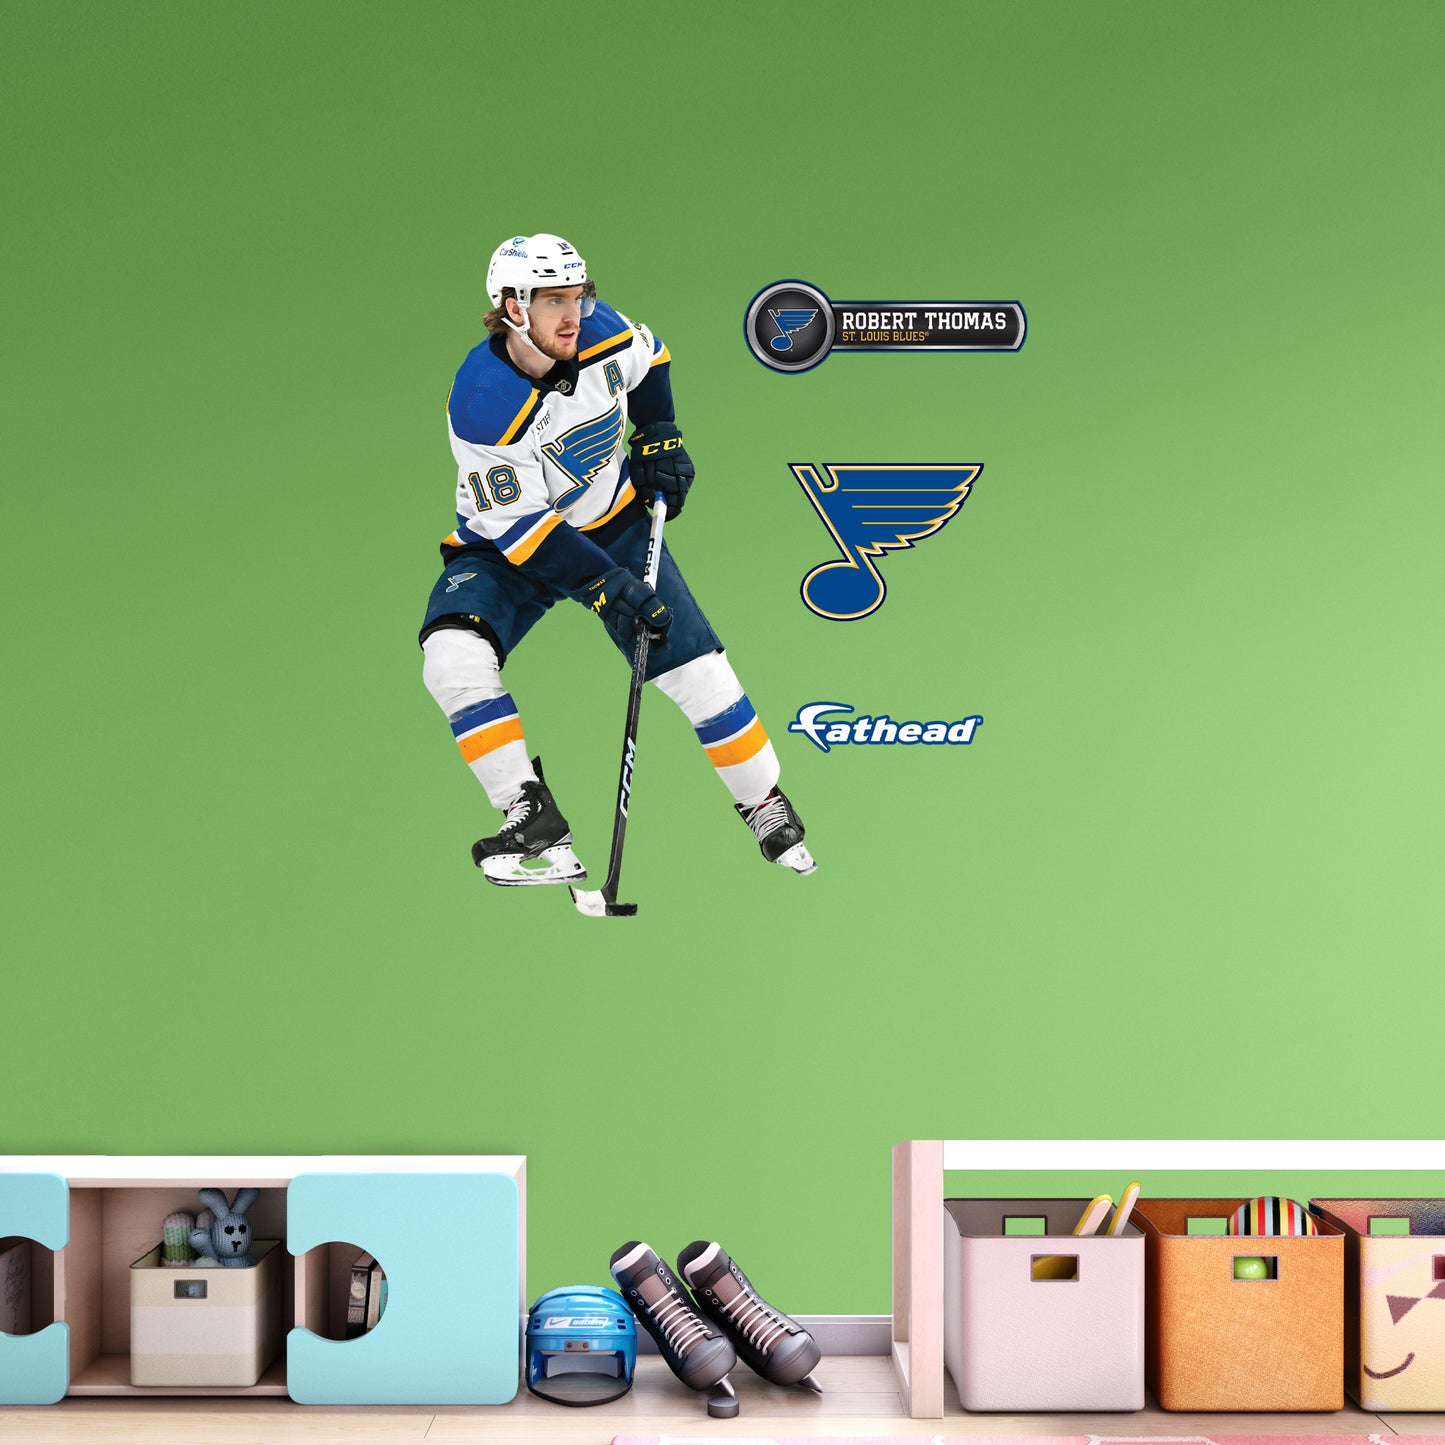 St. Louis Blues: Robert Thomas         - Officially Licensed NHL Removable     Adhesive Decal